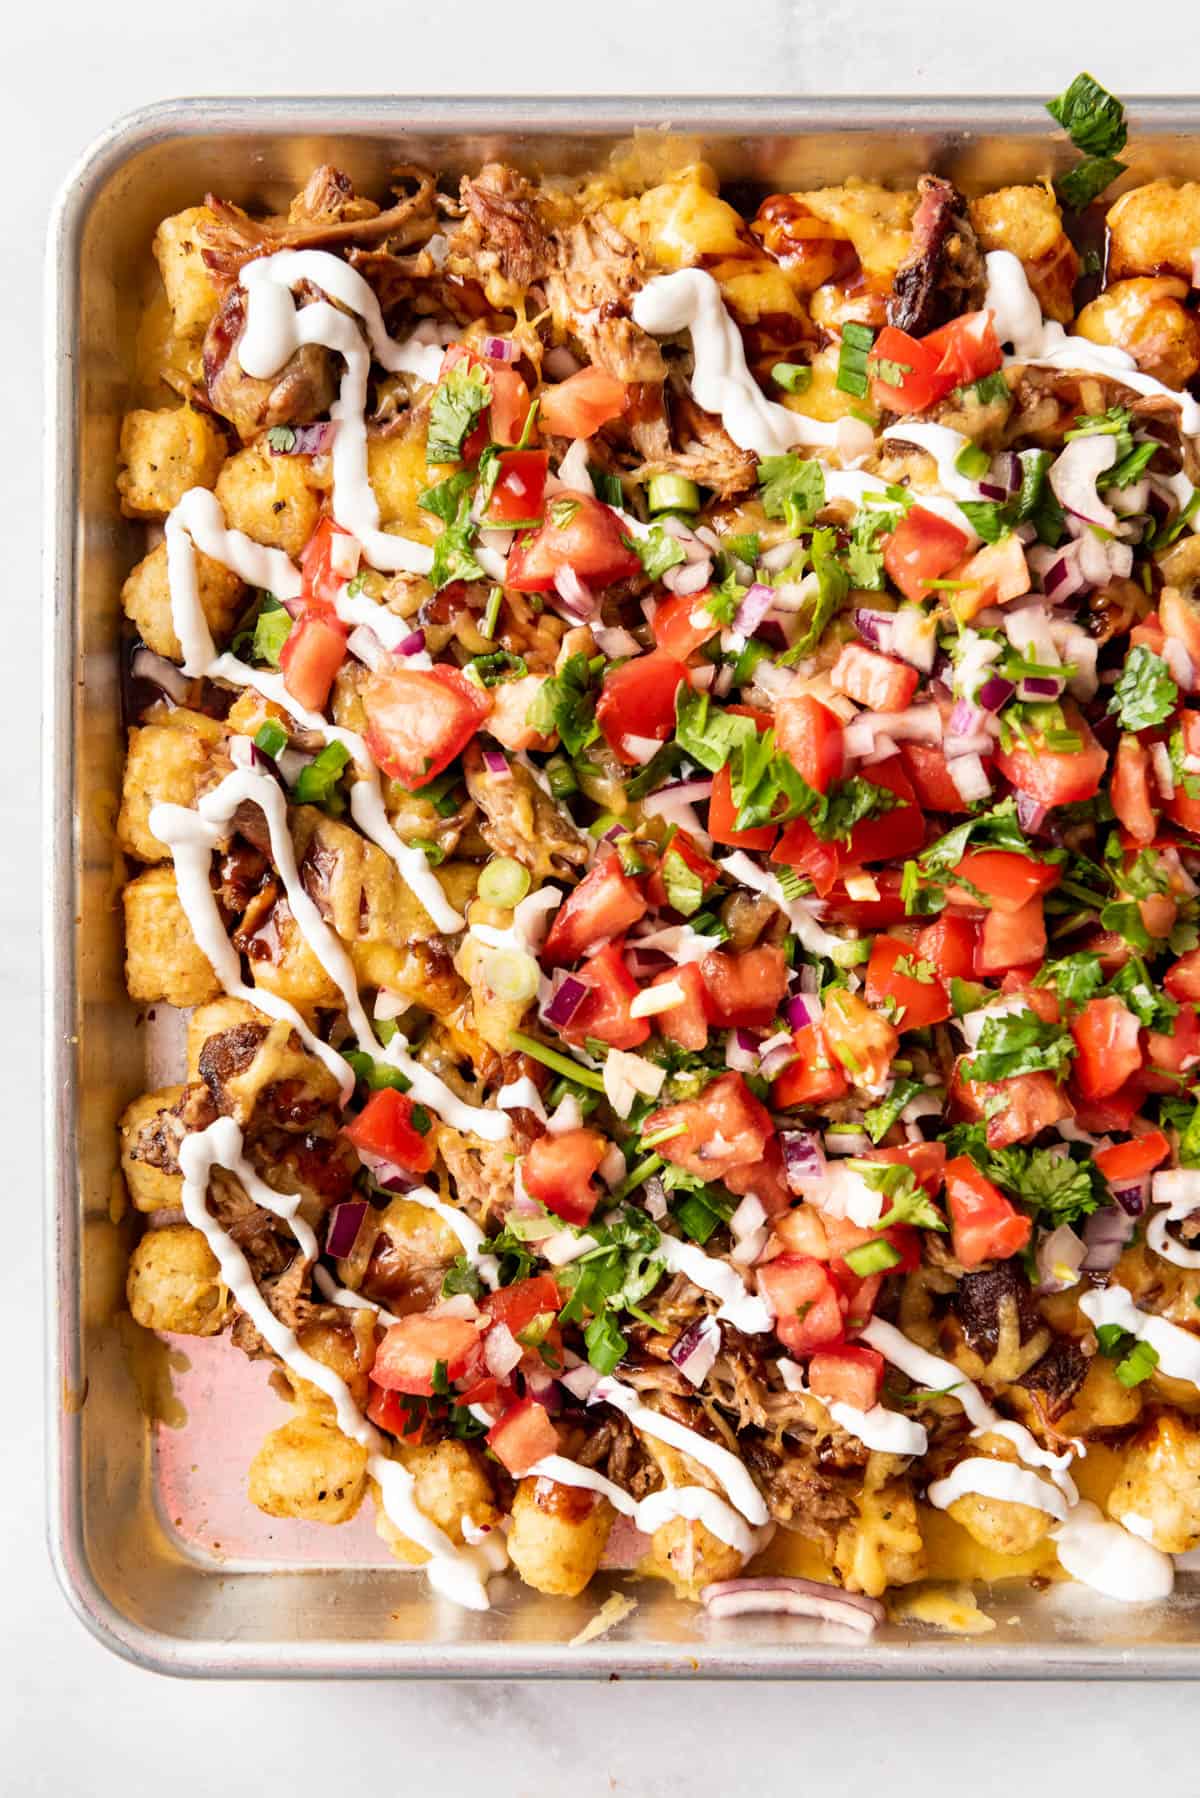 An image of loaded tater tot nachos (aka totchos) with pulled pork, pico de gallo, cheese, and sour cream.